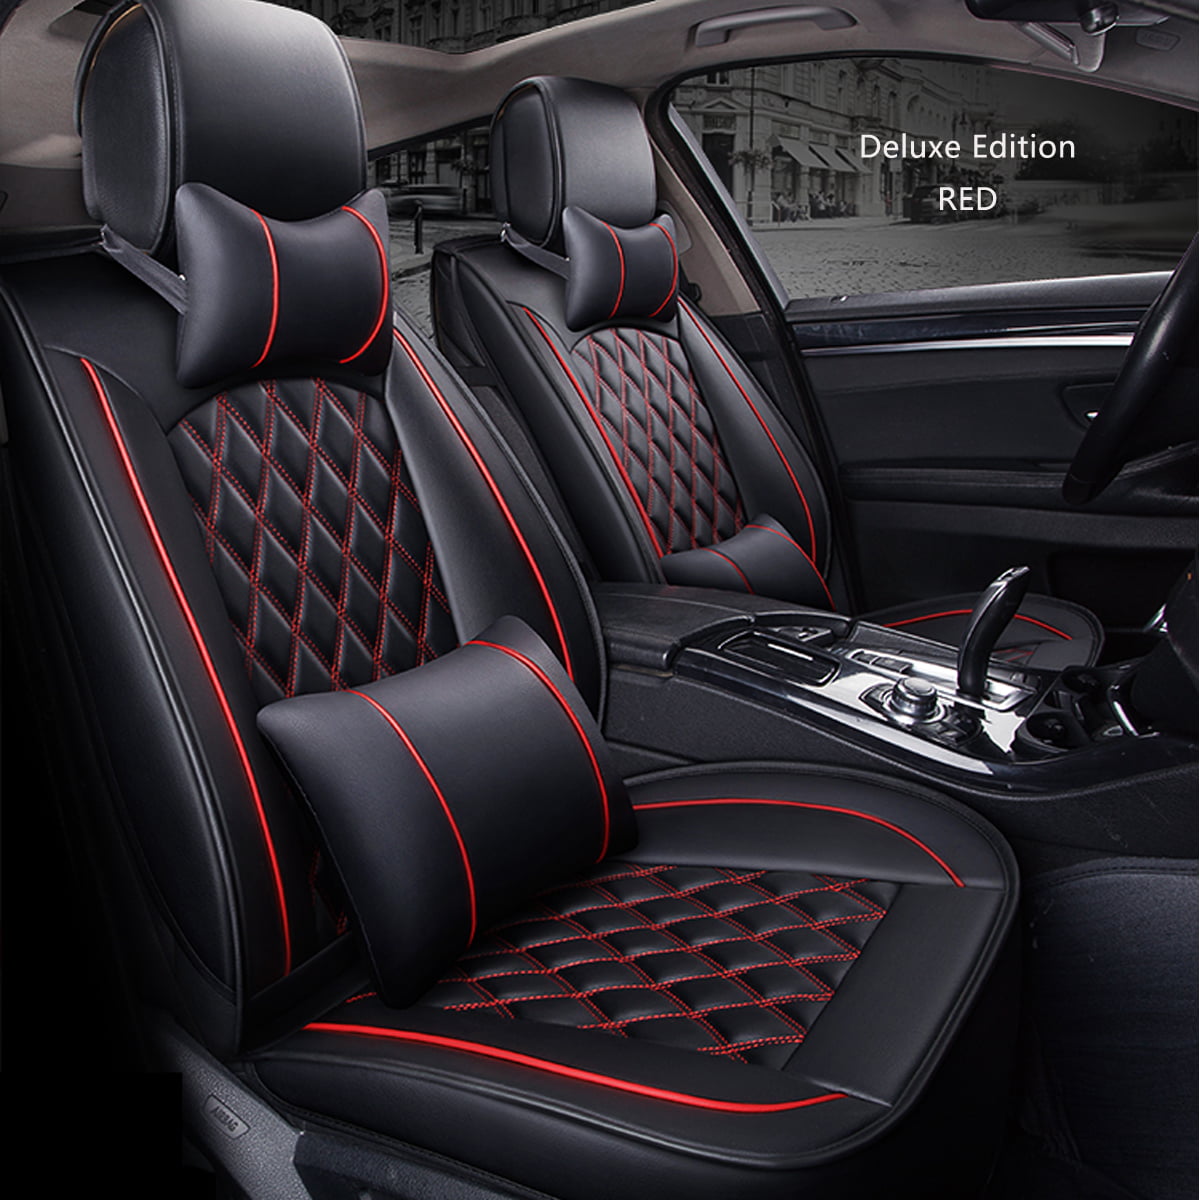 Black N/D MAOANLY Universal 5 Car Seat Covers Cushion,Car Seat Covers Full PU Leather